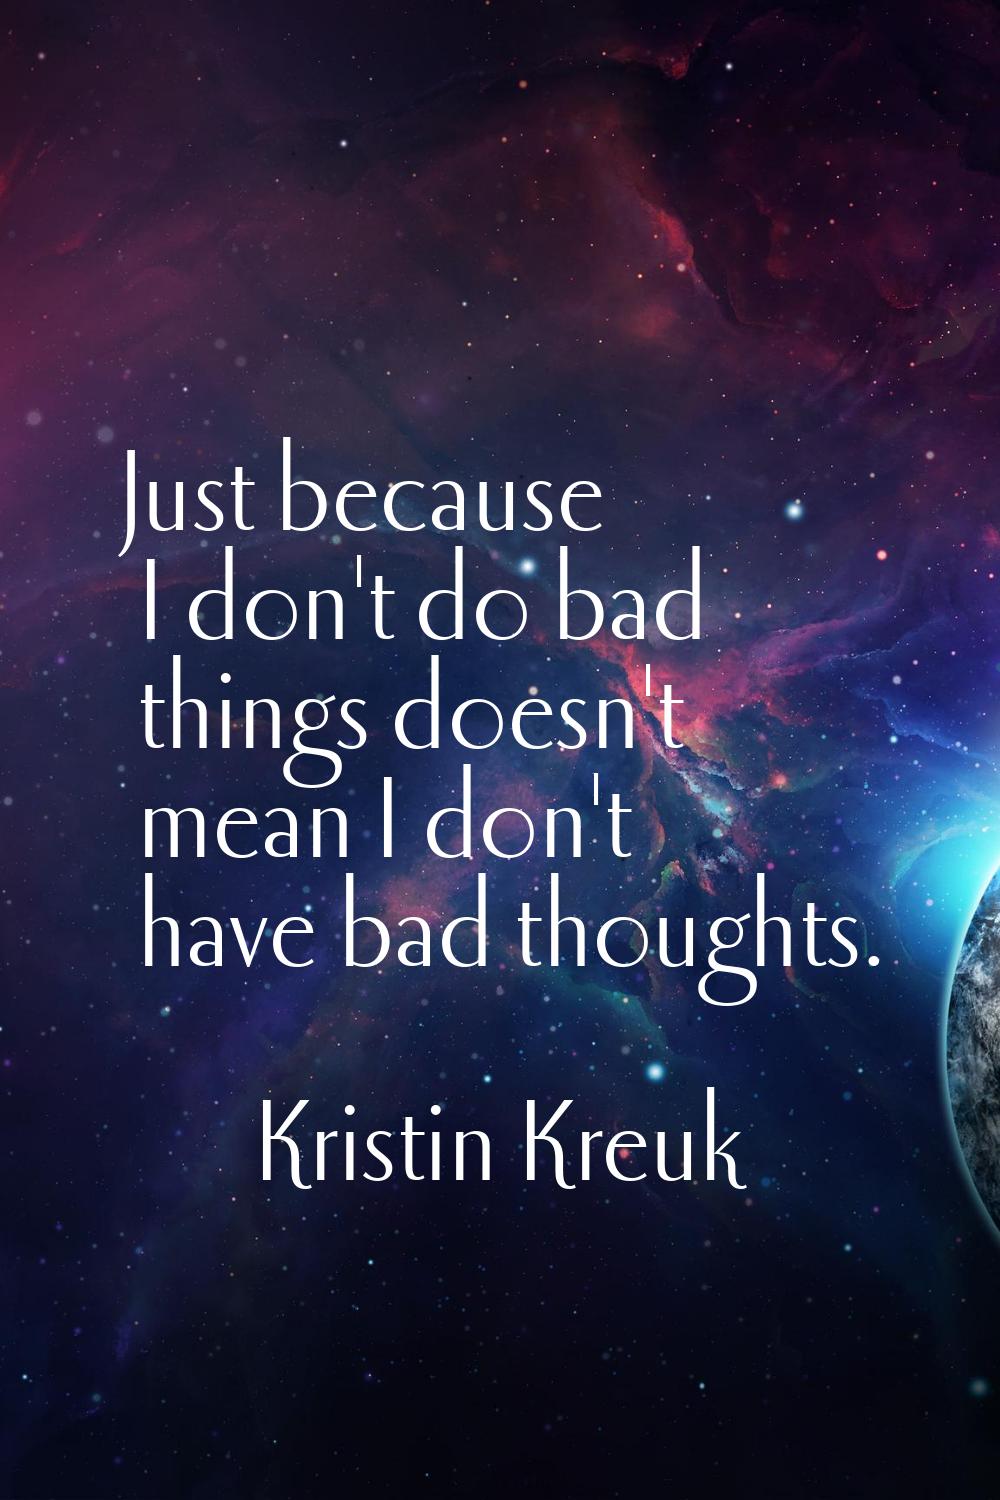 Just because I don't do bad things doesn't mean I don't have bad thoughts.